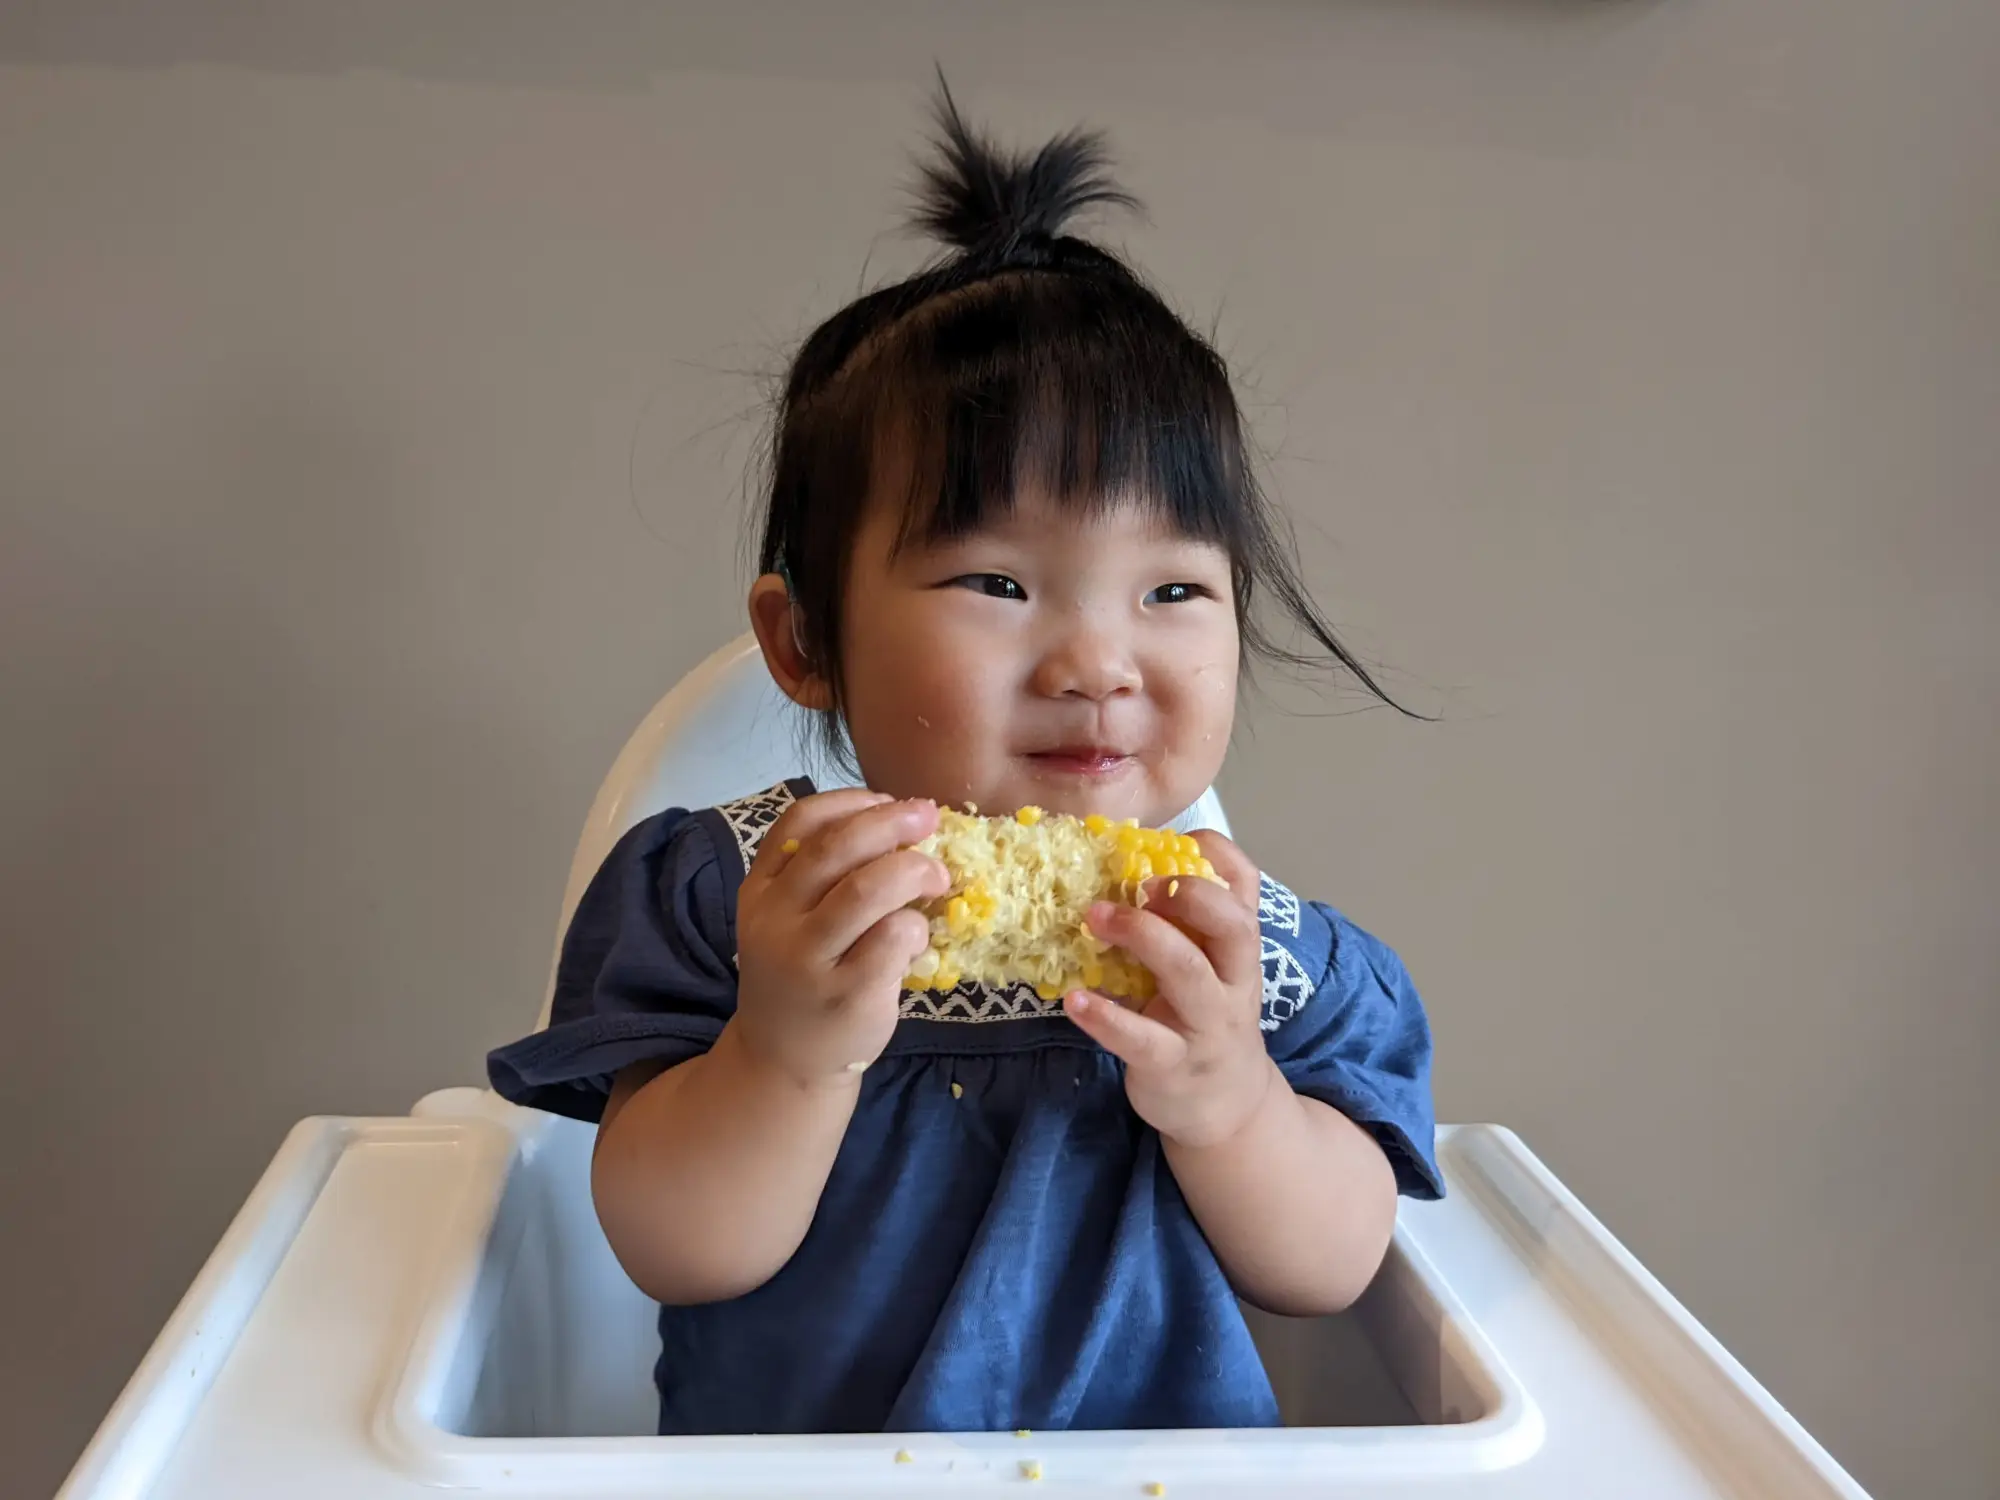 Smiling baby sitting in high chair practicing baby led weaning by holding/eating a piece of corn on the cob.